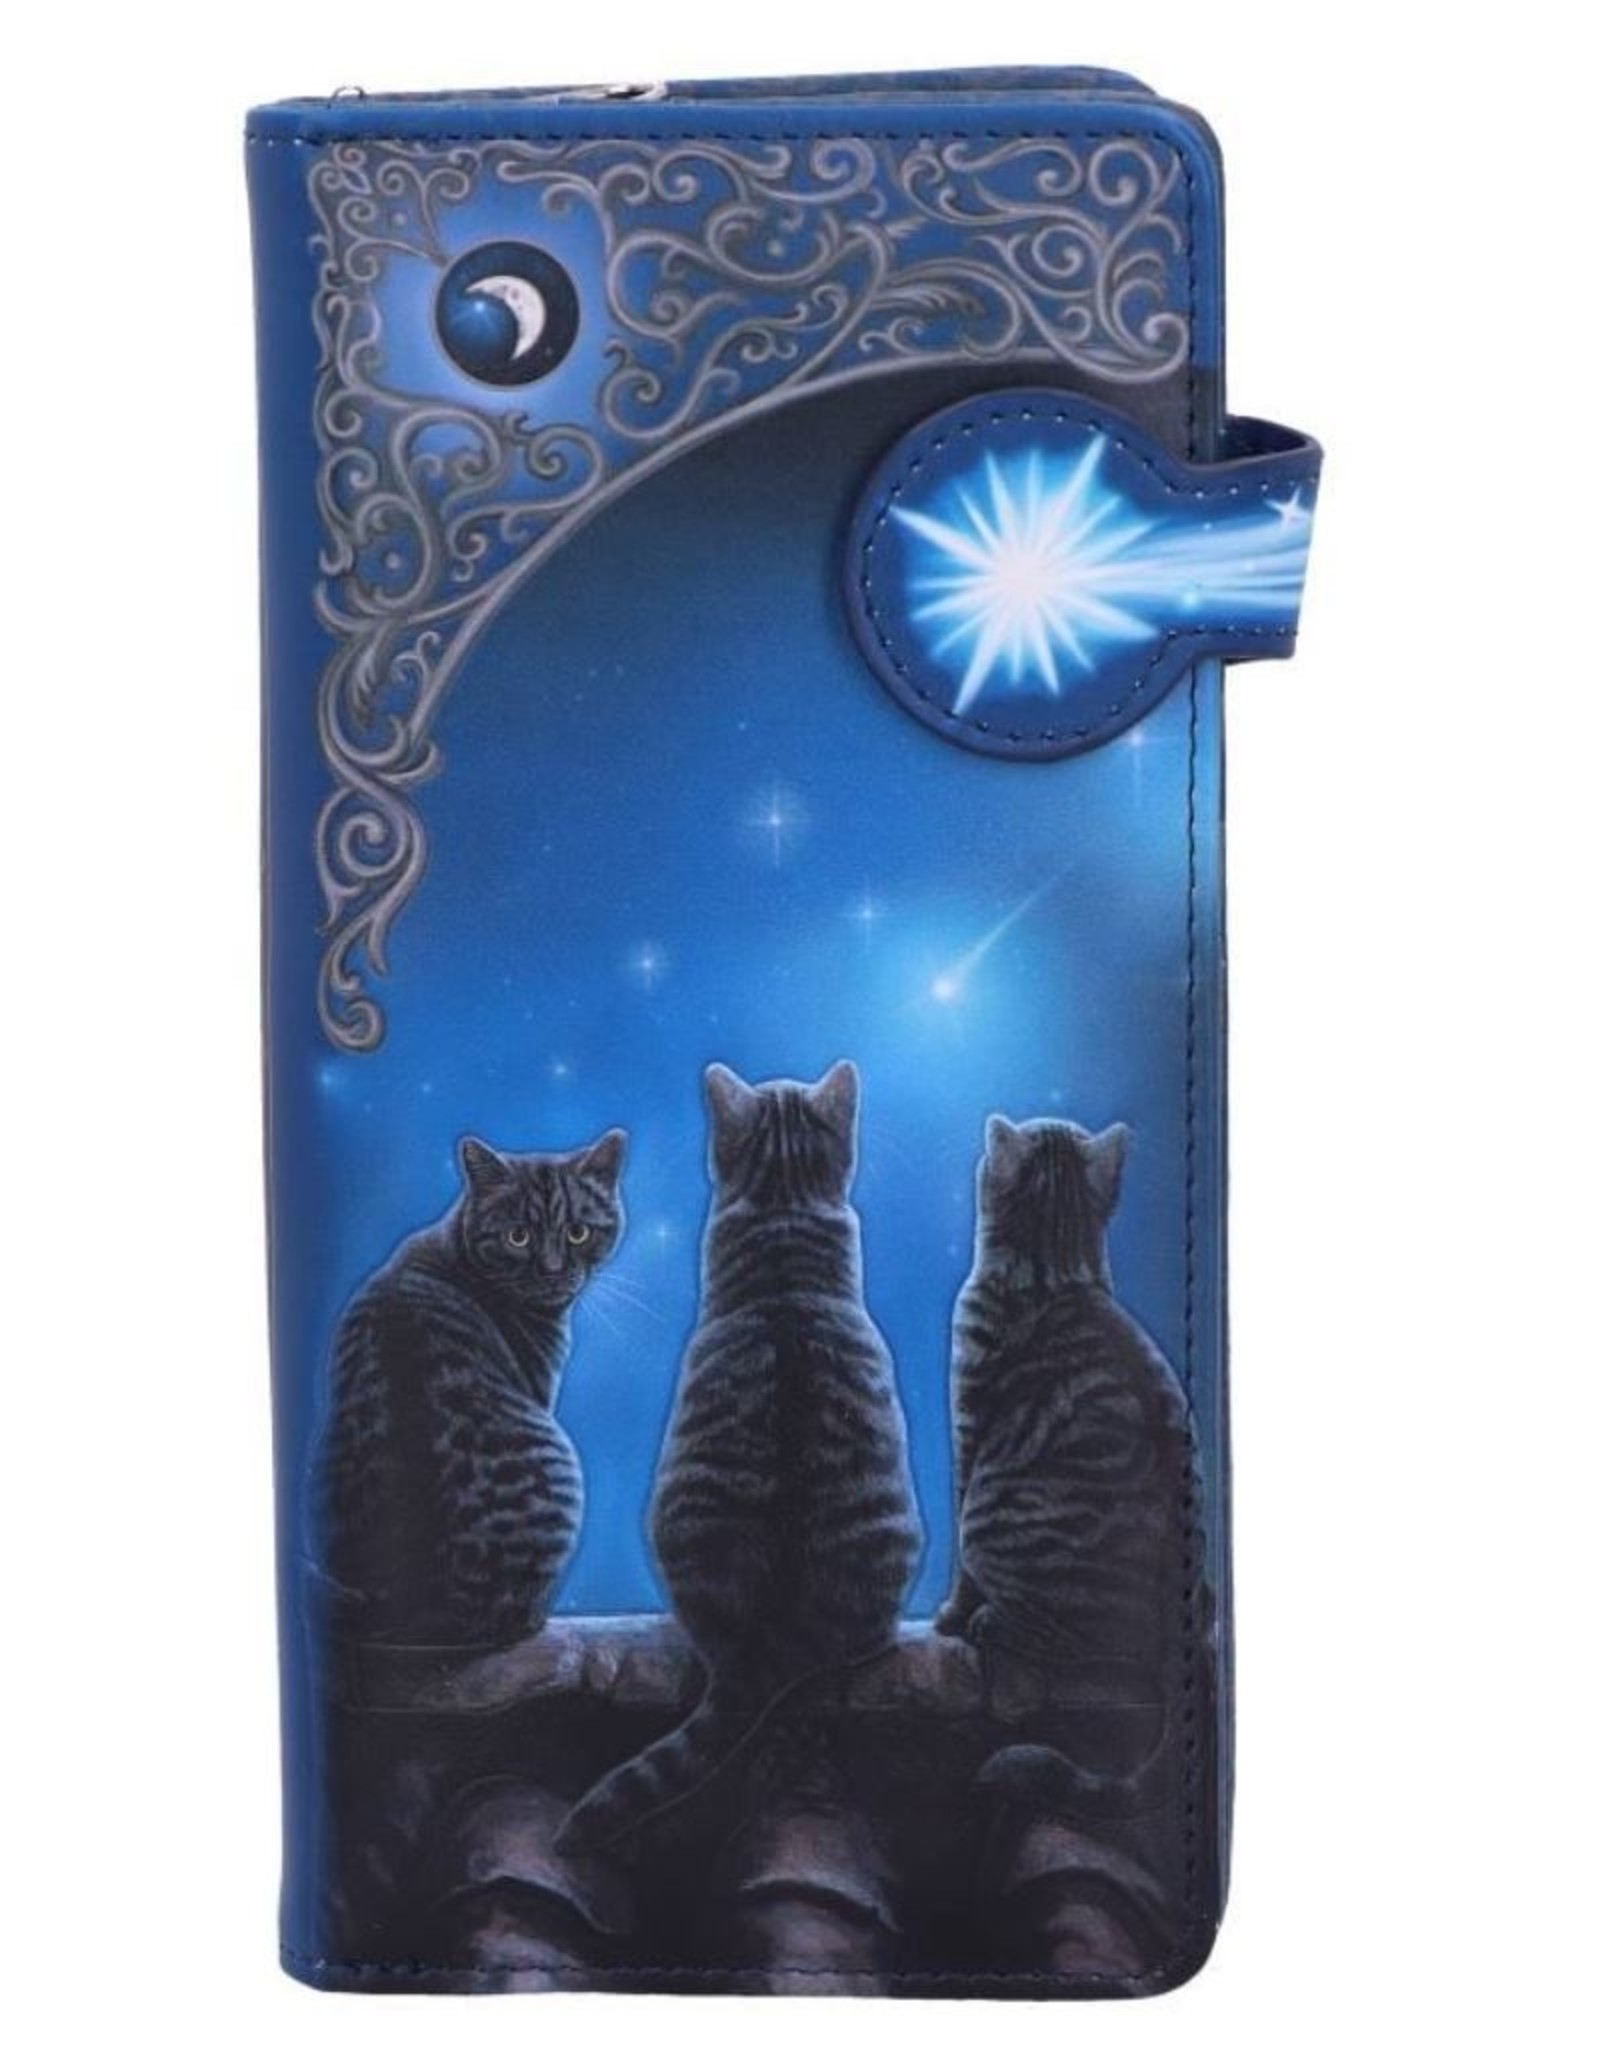 NemesisNow Gothic wallets and purses - Wish Upon a Star Embossed Purse Cats Lisa Parker